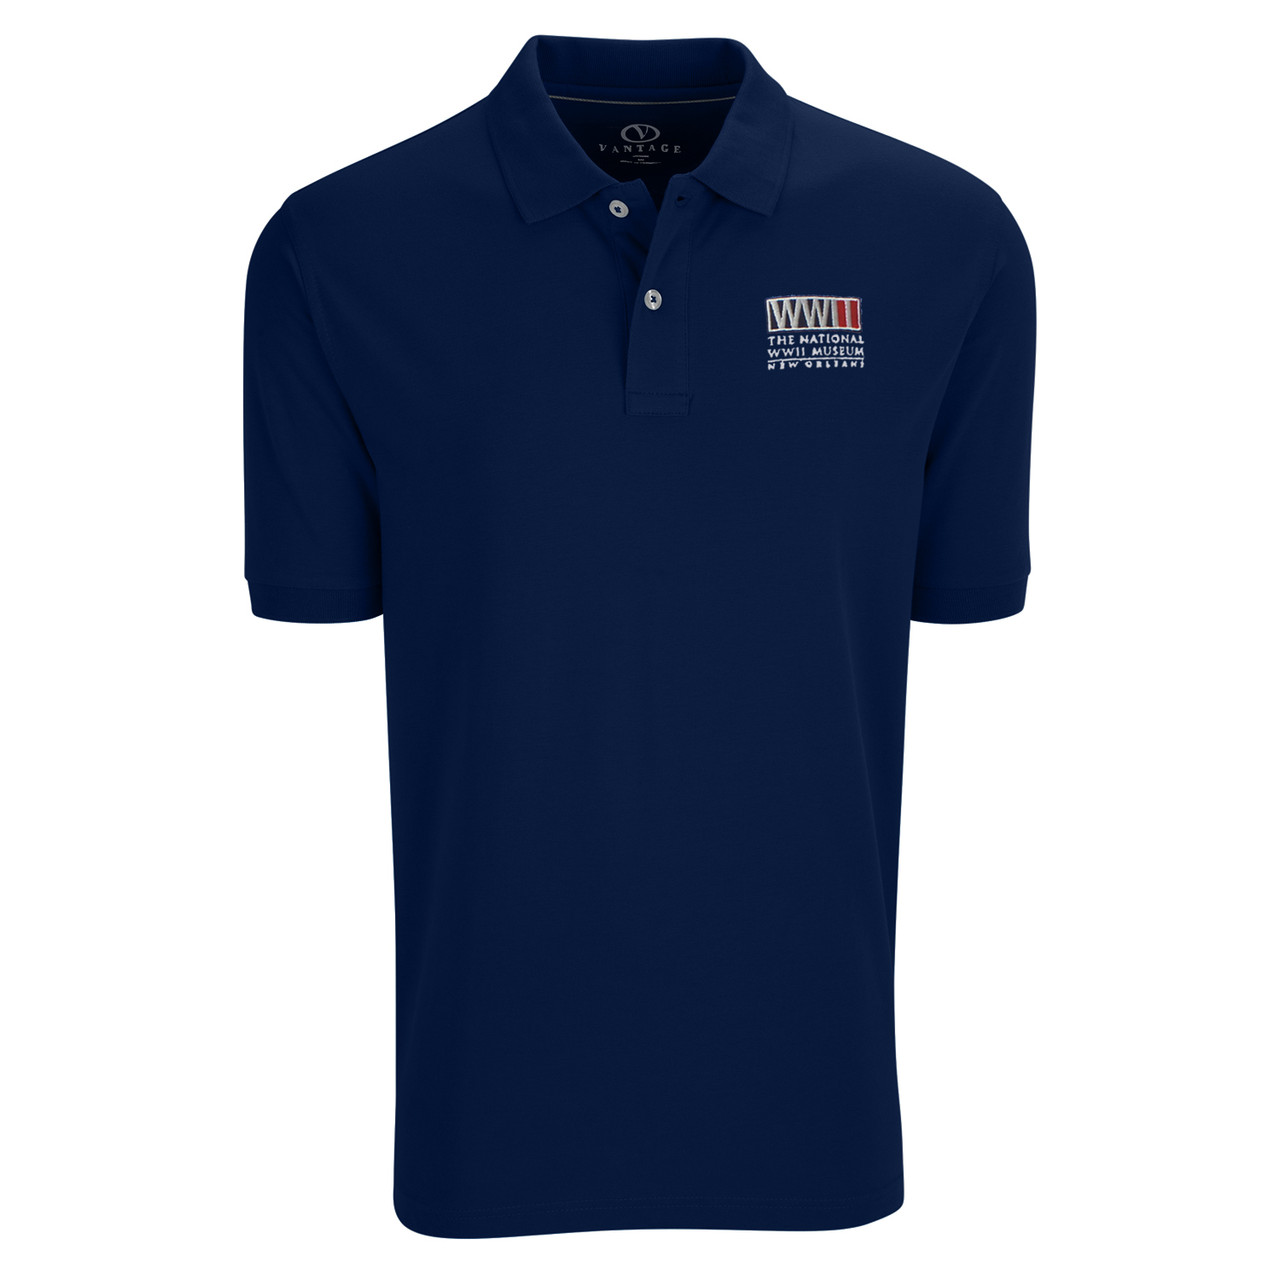 Vantage Mens Perfect Polo - The National WWII Museum